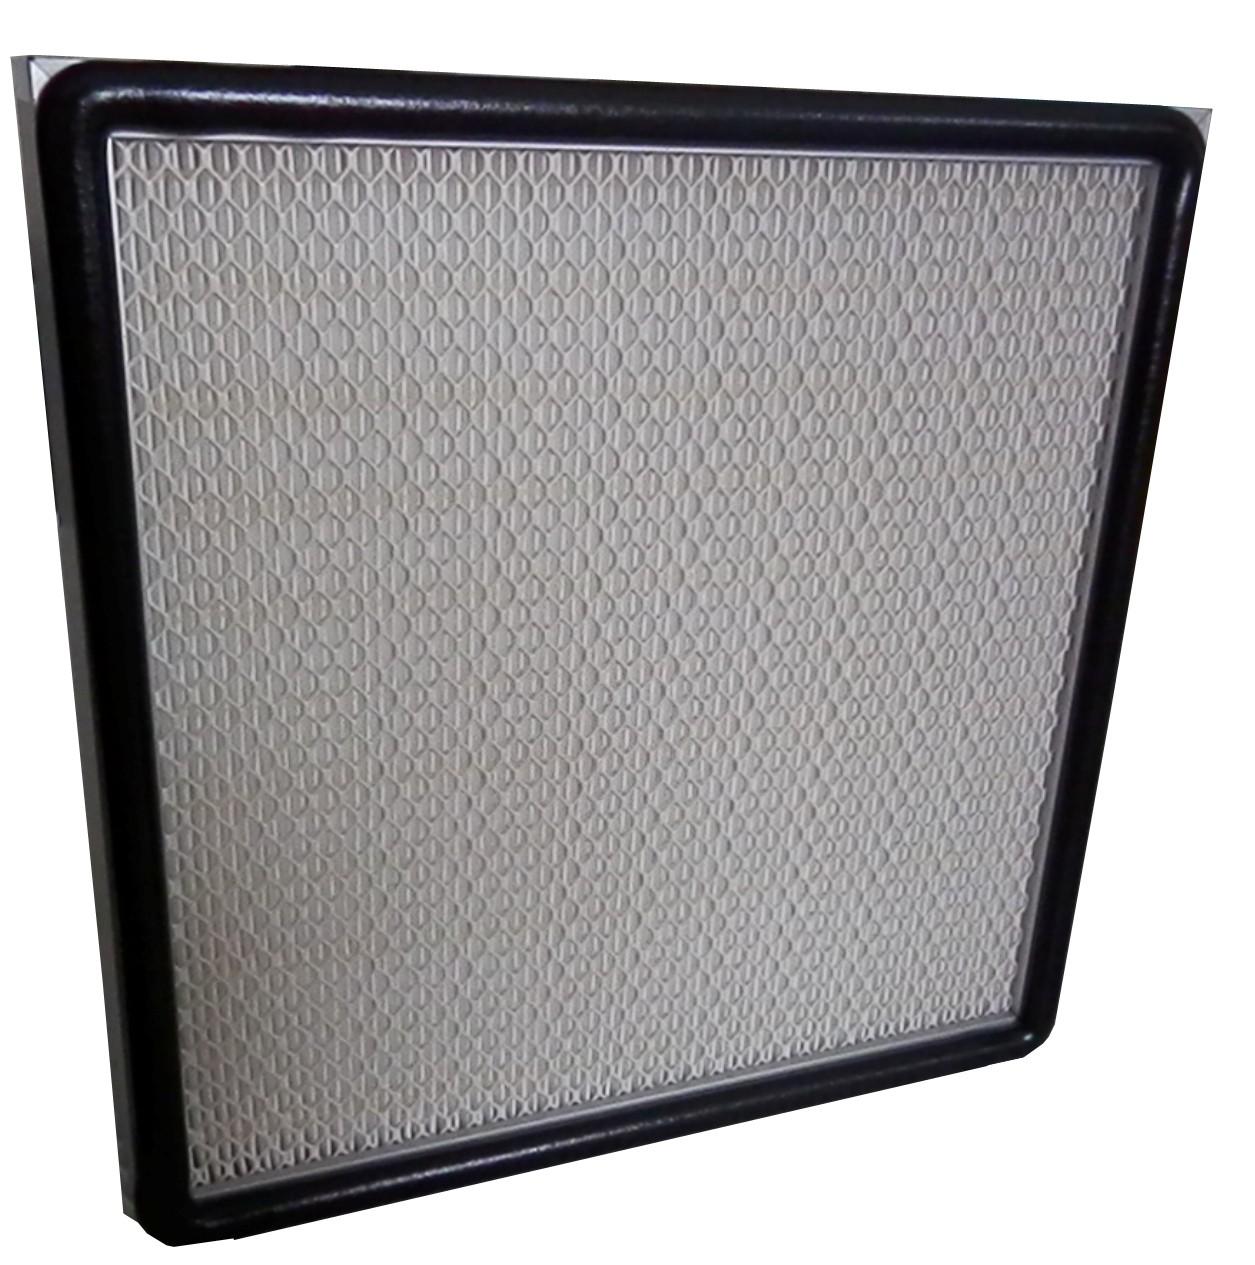 HAOAIRTECH vacuum cleaner hepa filter with al clapboard for air cleaner-1